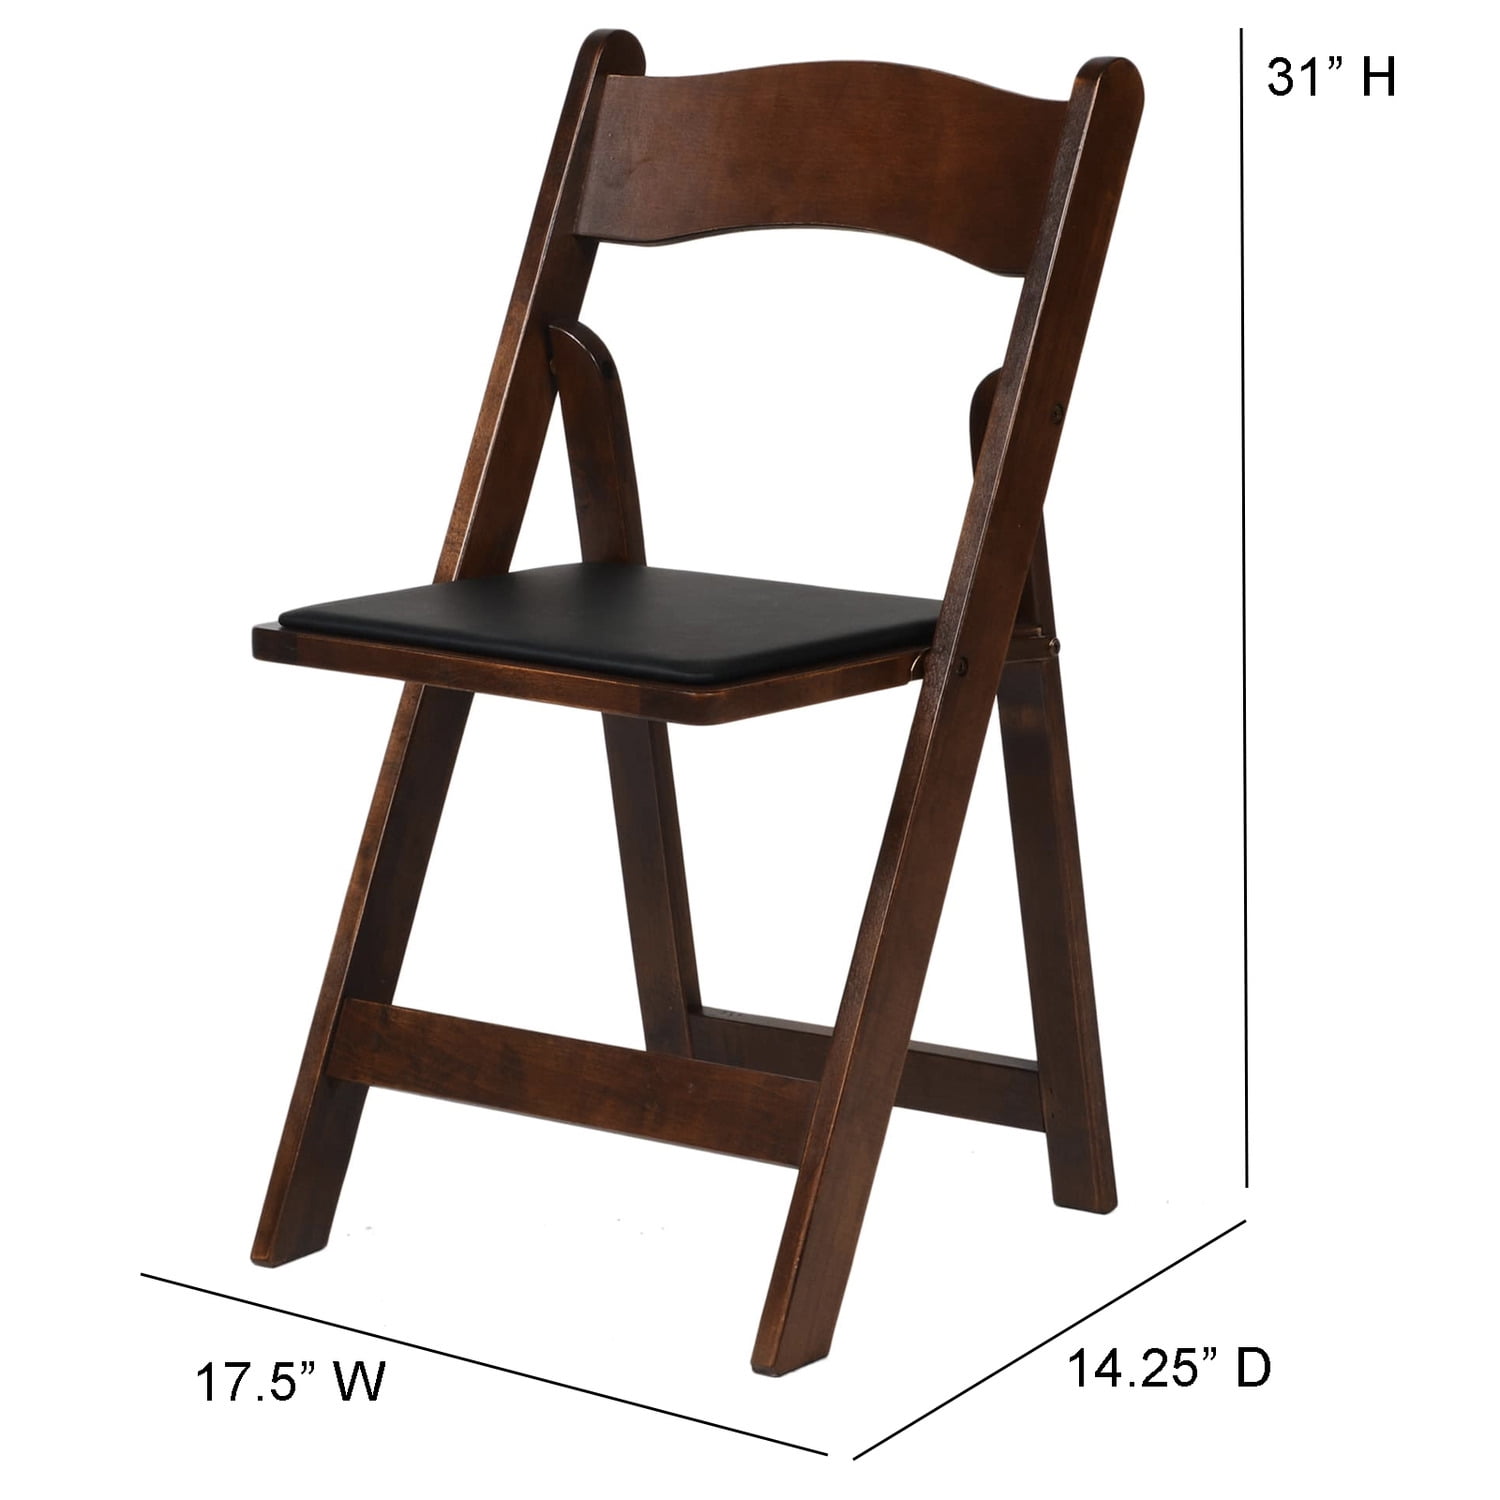 A-101-frw-4 American Classic Fruitwood Wood Folding Chair - 30.5 In. - Set Of 4